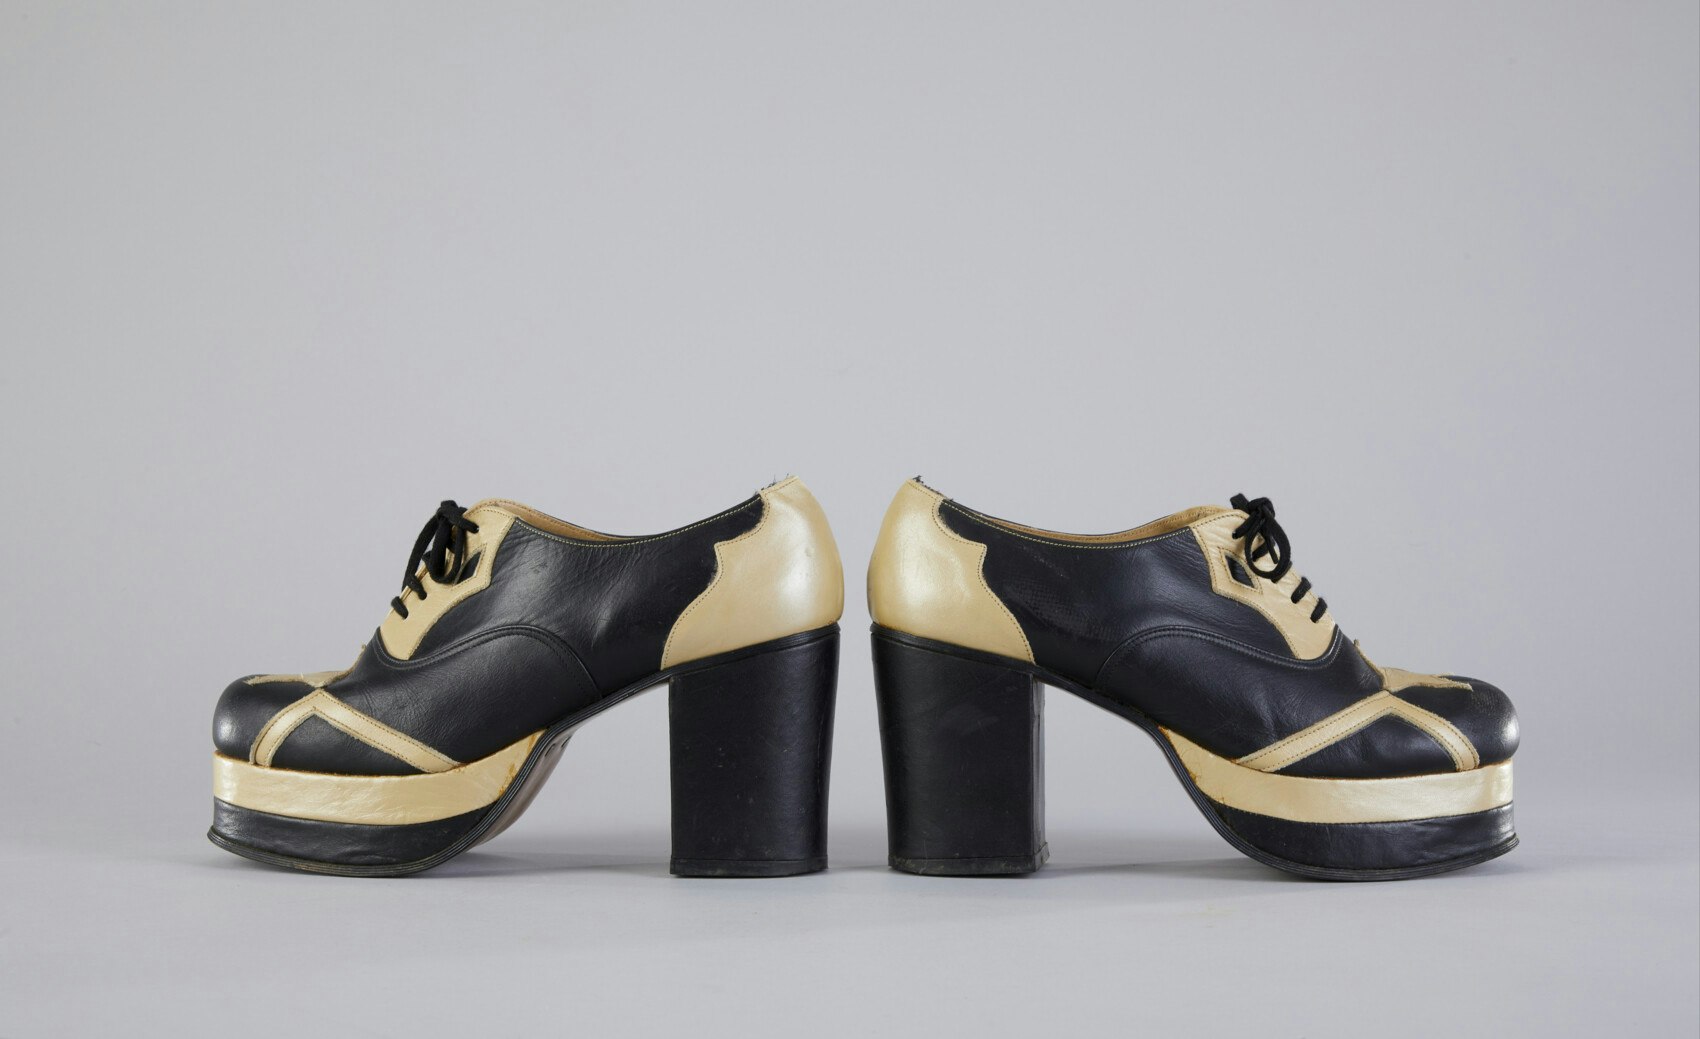 A pair of platform shoes that are black and cream.